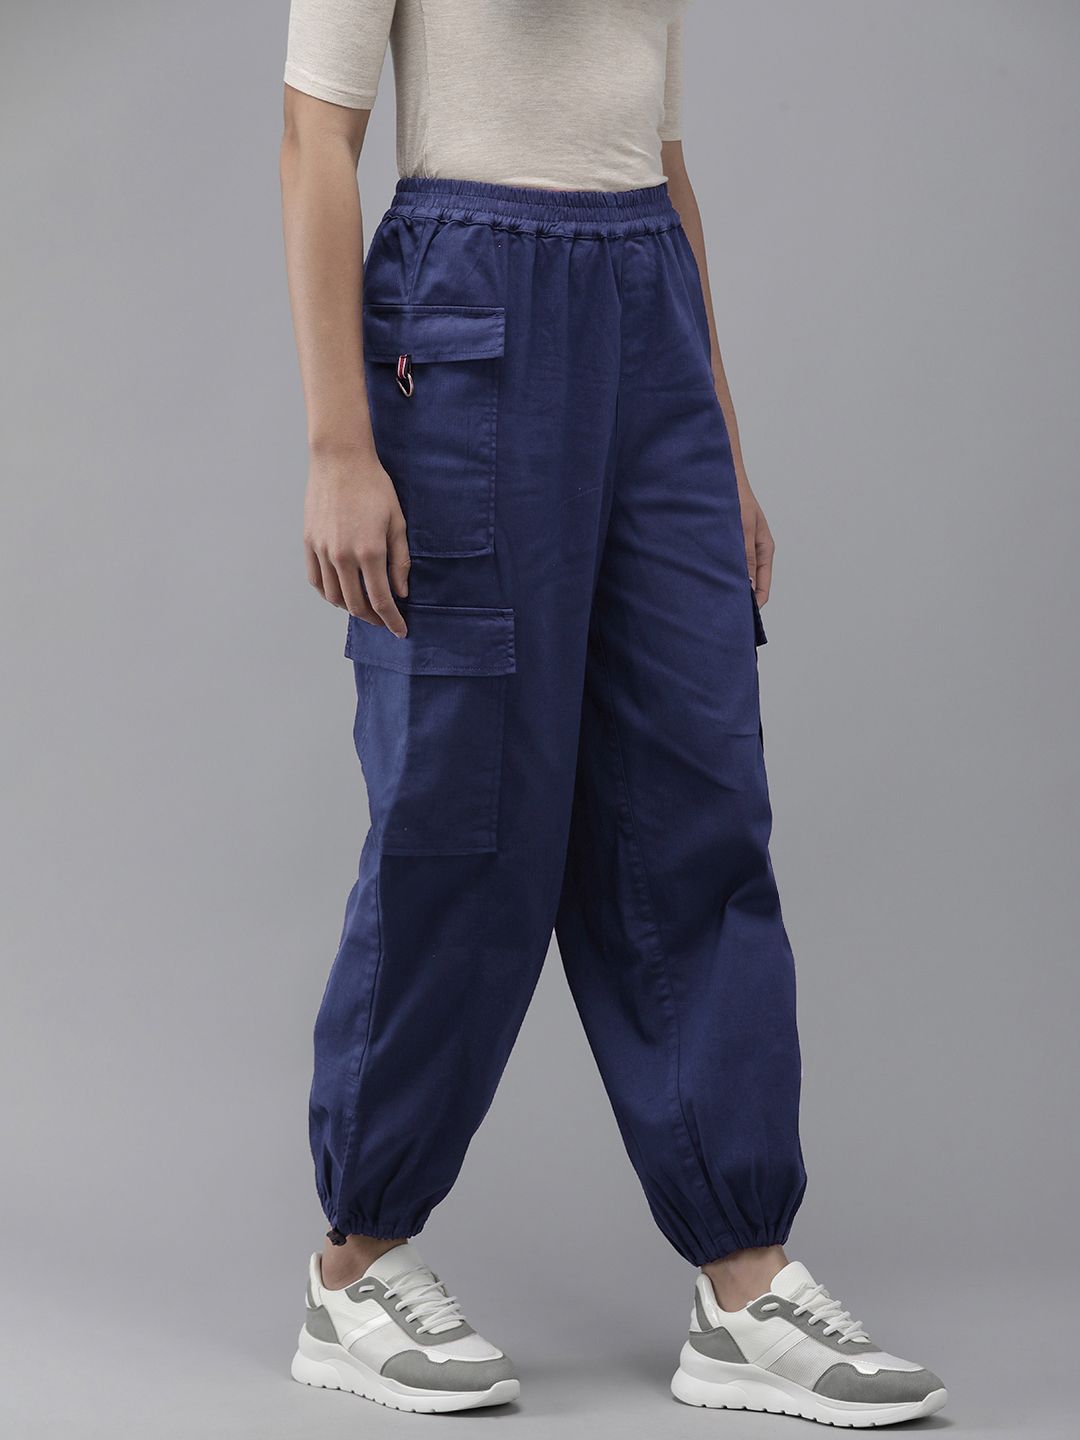 The Roadster Lifestyle Co. Women Solid Jogger Trousers With Pocket Detailing Price in India